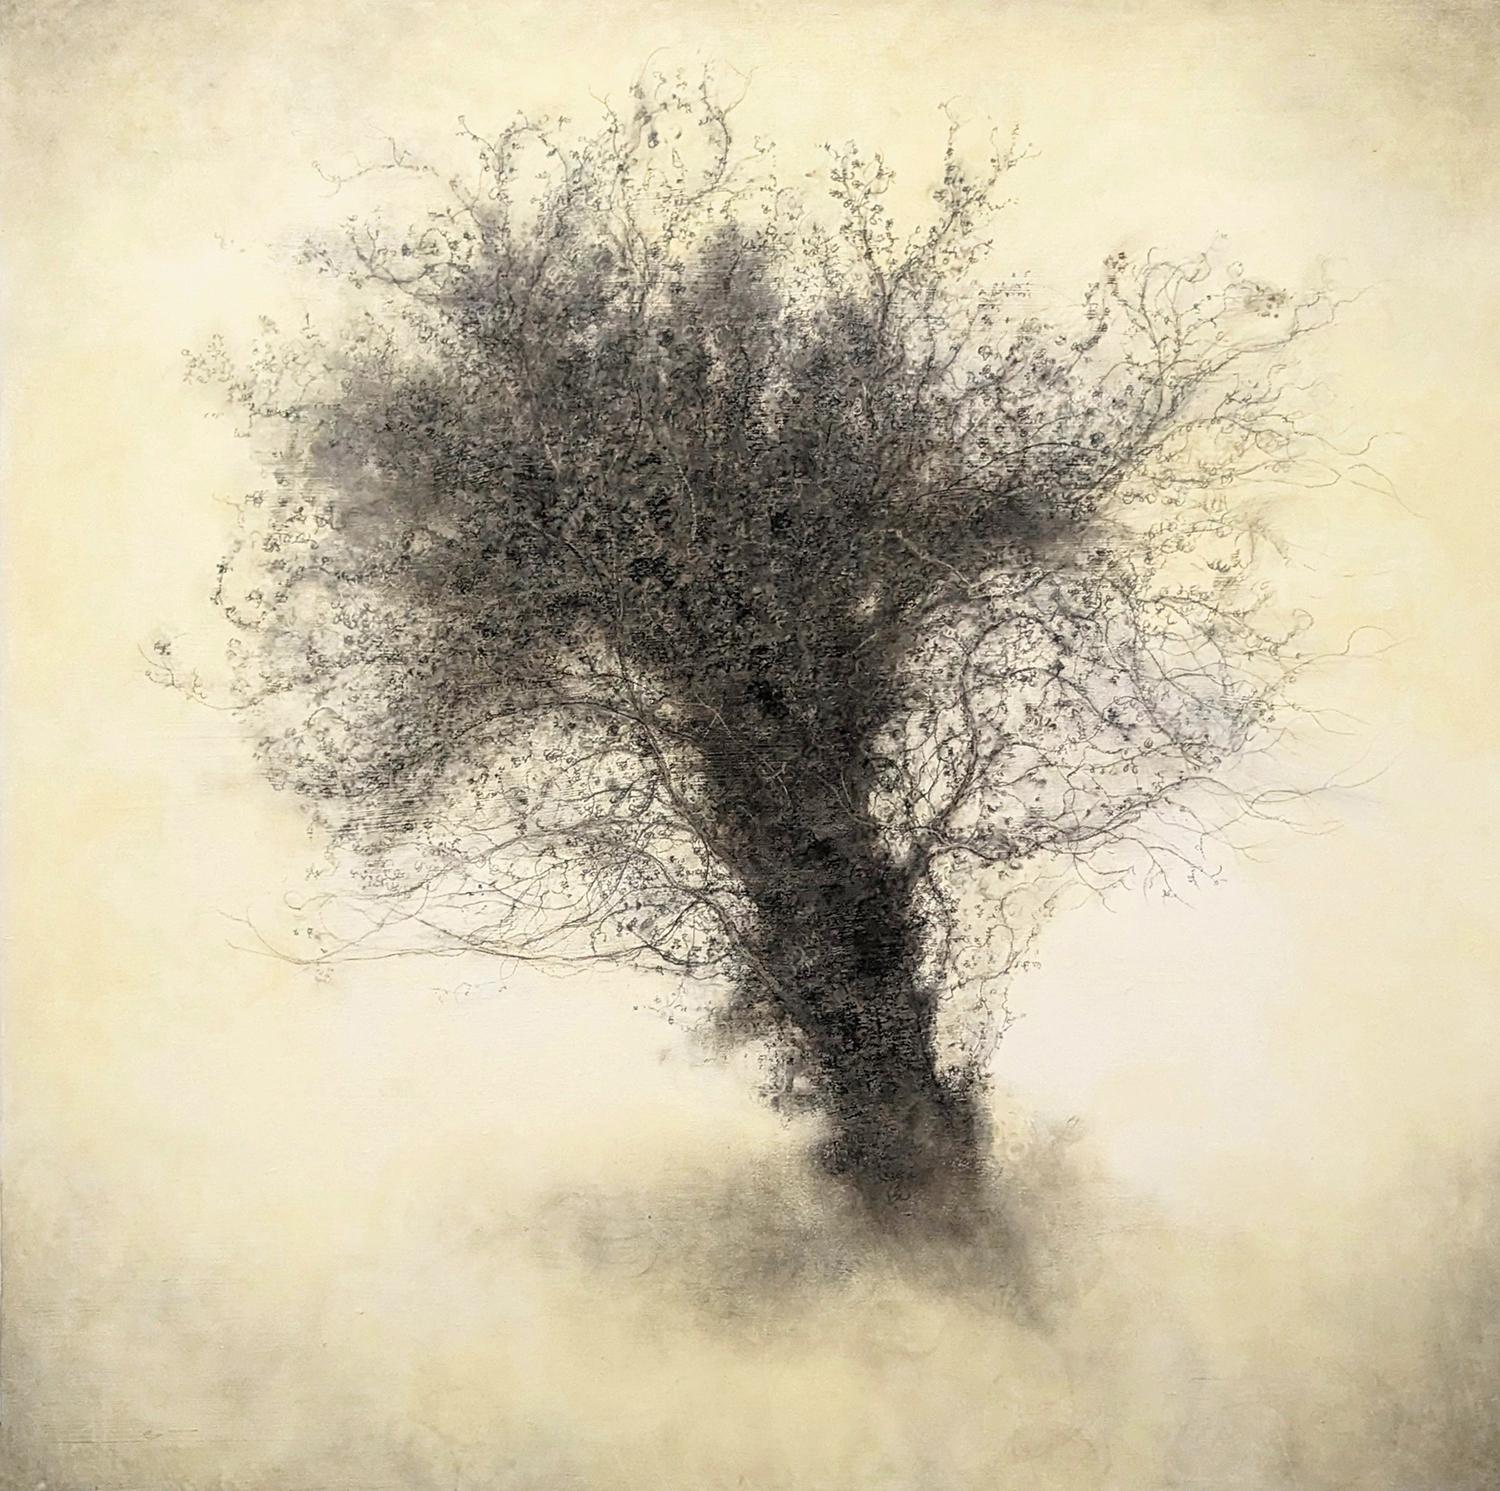 Romantic, tonalist style charcoal drawing of a tree in isolation
by Sue Bryan

acrylic and charcoal on Arches on wood
36 x 36 x 1.5 inches
Hangs flush to the wall
Signed on verso

In contrast with her more traditional landscape images, "Froth"